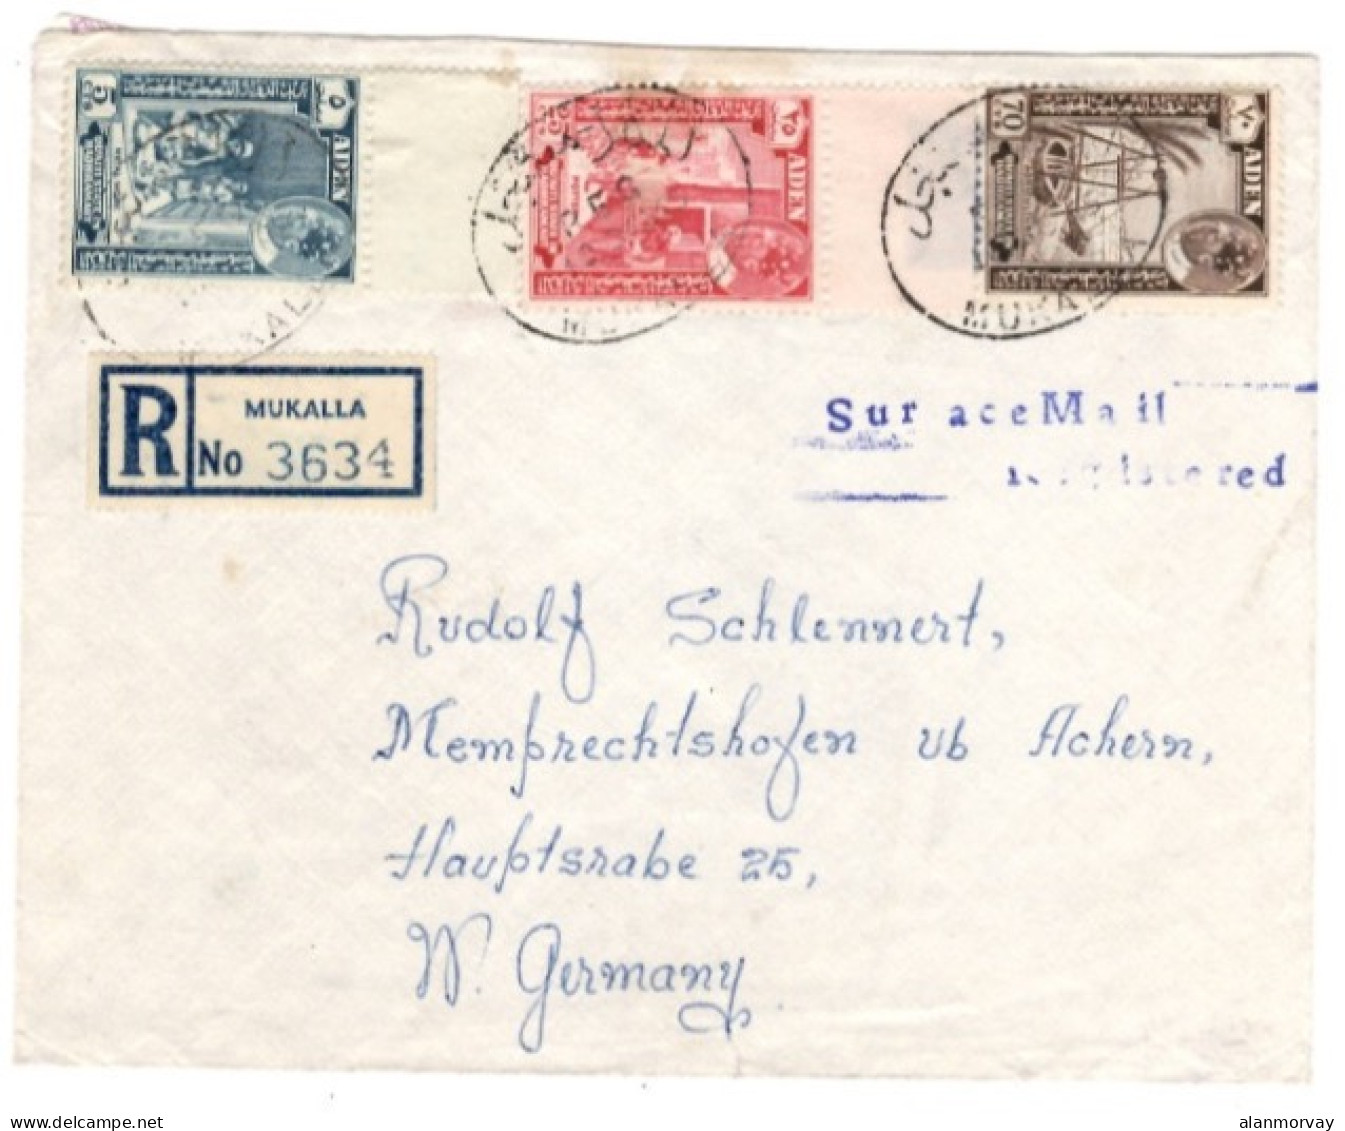 Aden - Aden Quaiti State Of Hadharmaut October 10, 1965 Registered Cover To Germany - Aden (1854-1963)